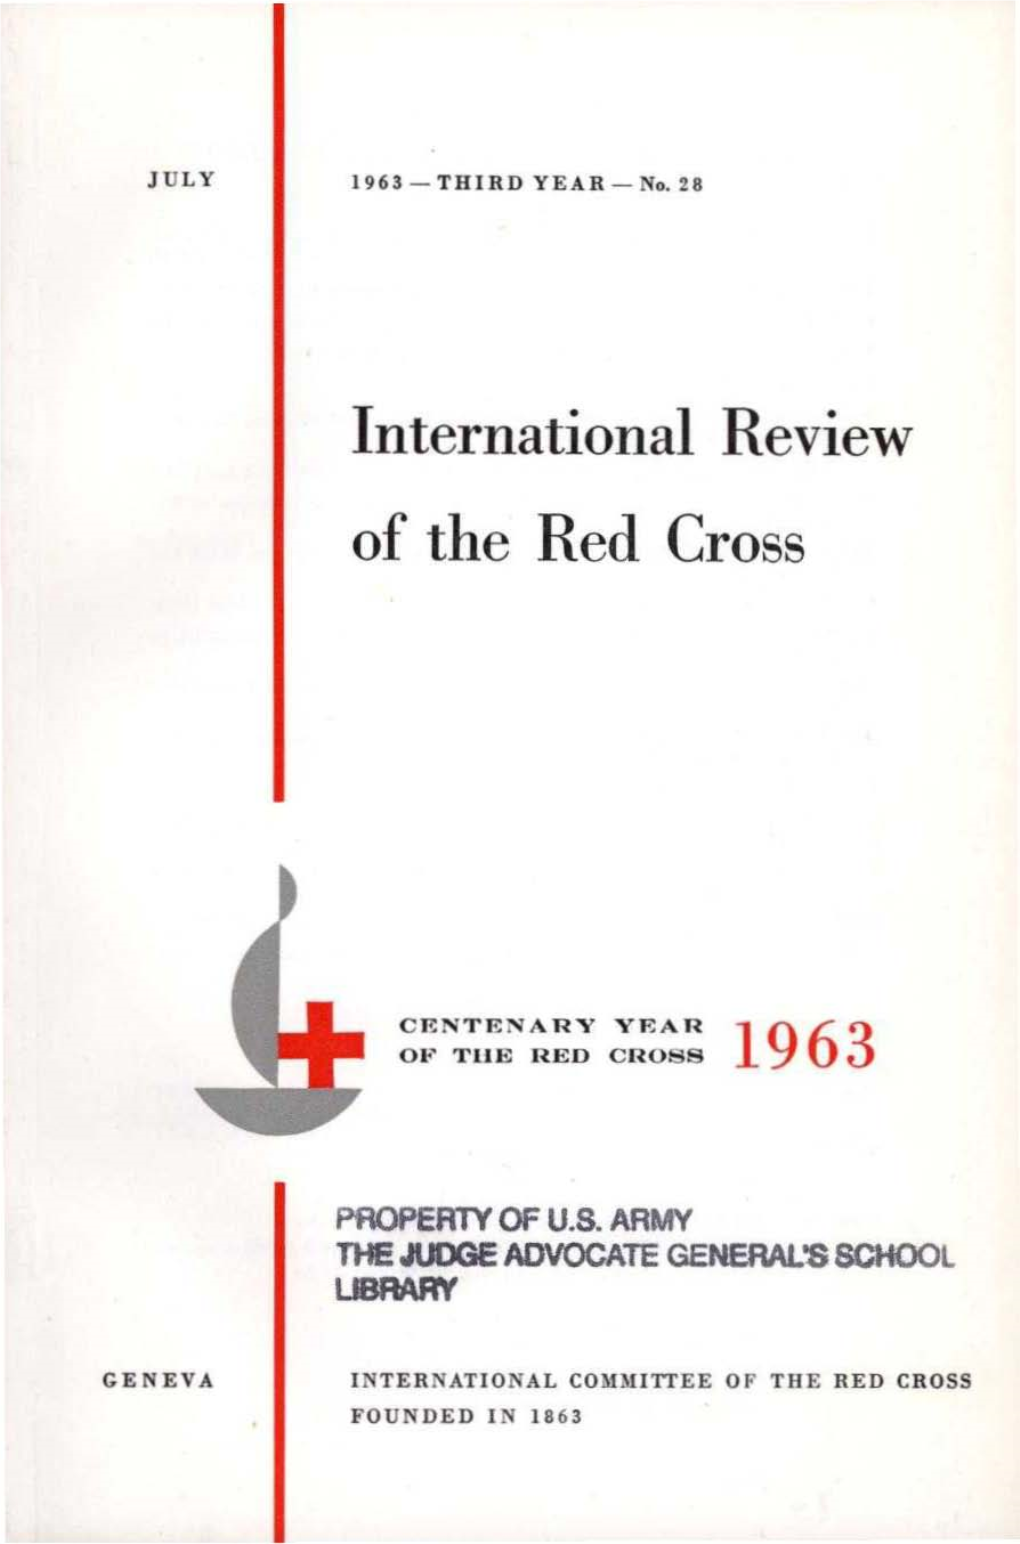 International Review of the Red Cross, July 1963, Third Year